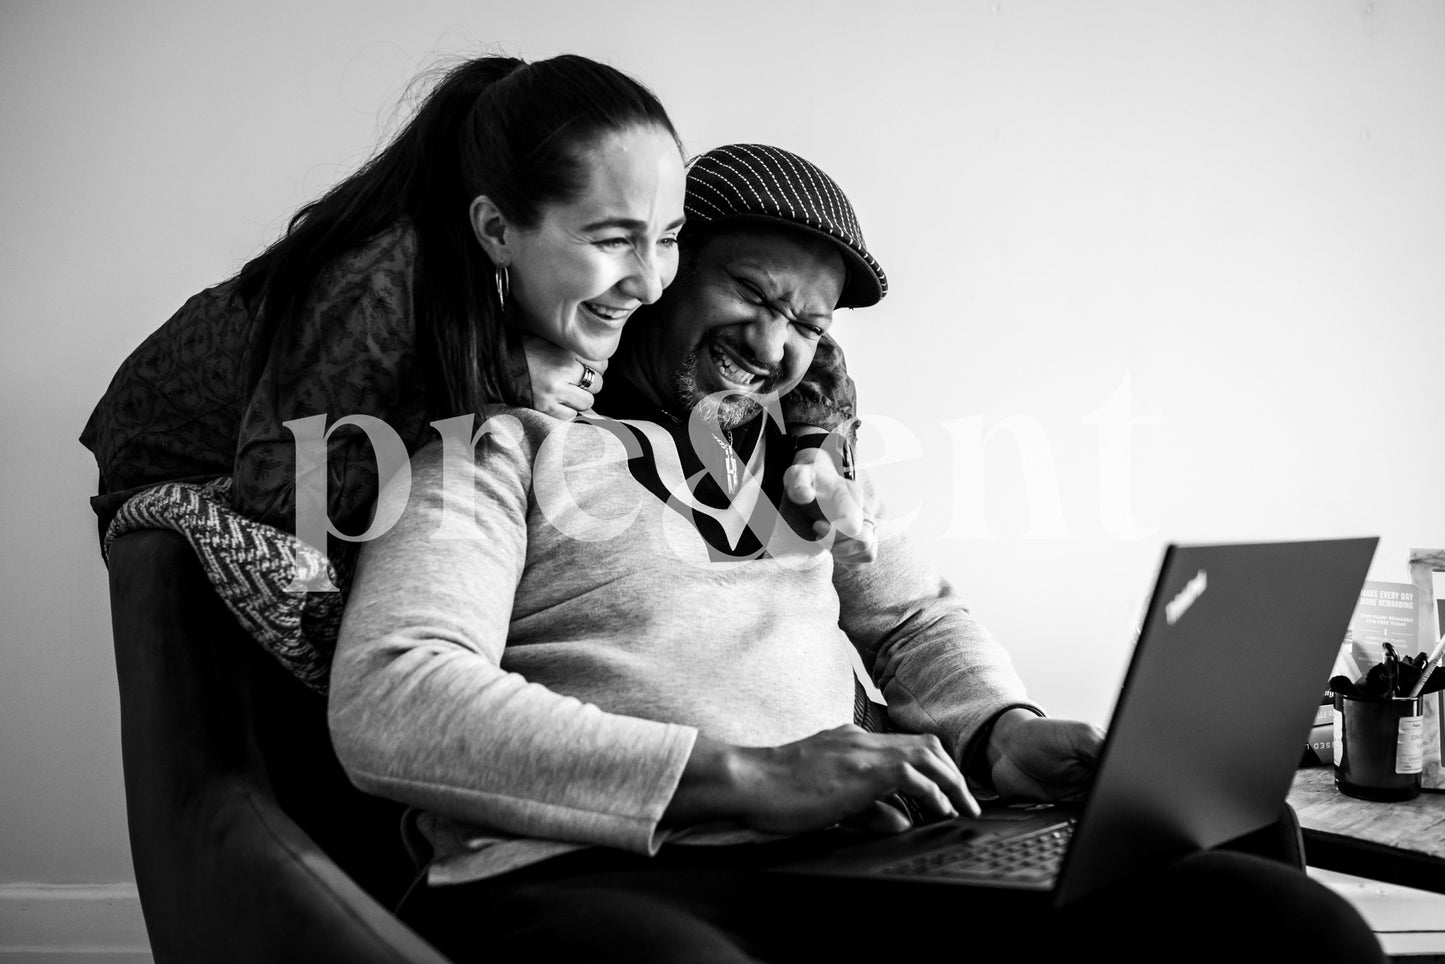 Couple at home having a joyful moment watching something on a laptop